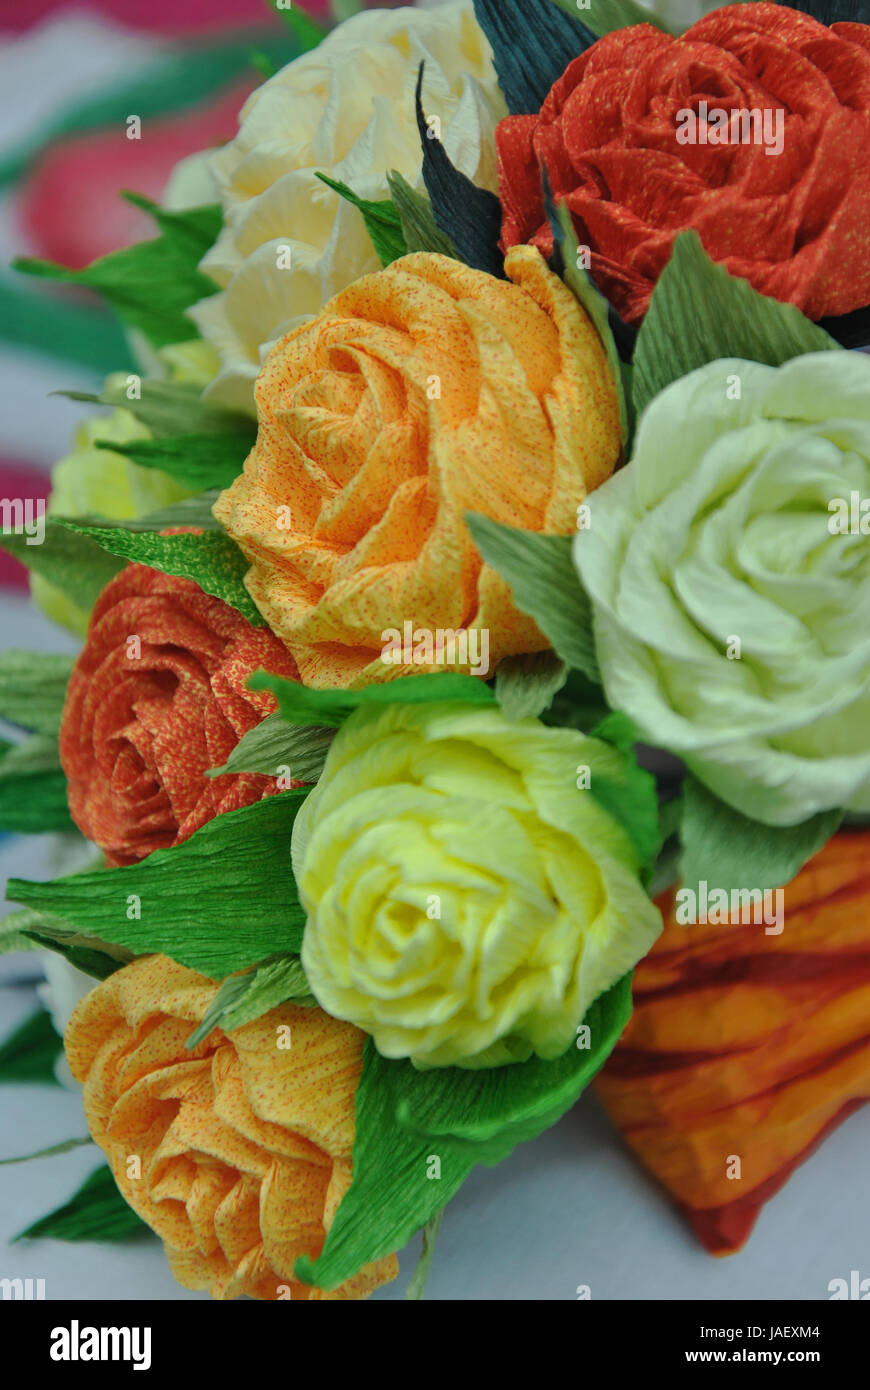 A close up photograph of handmade tissue paper rose bouquet Stock Photo